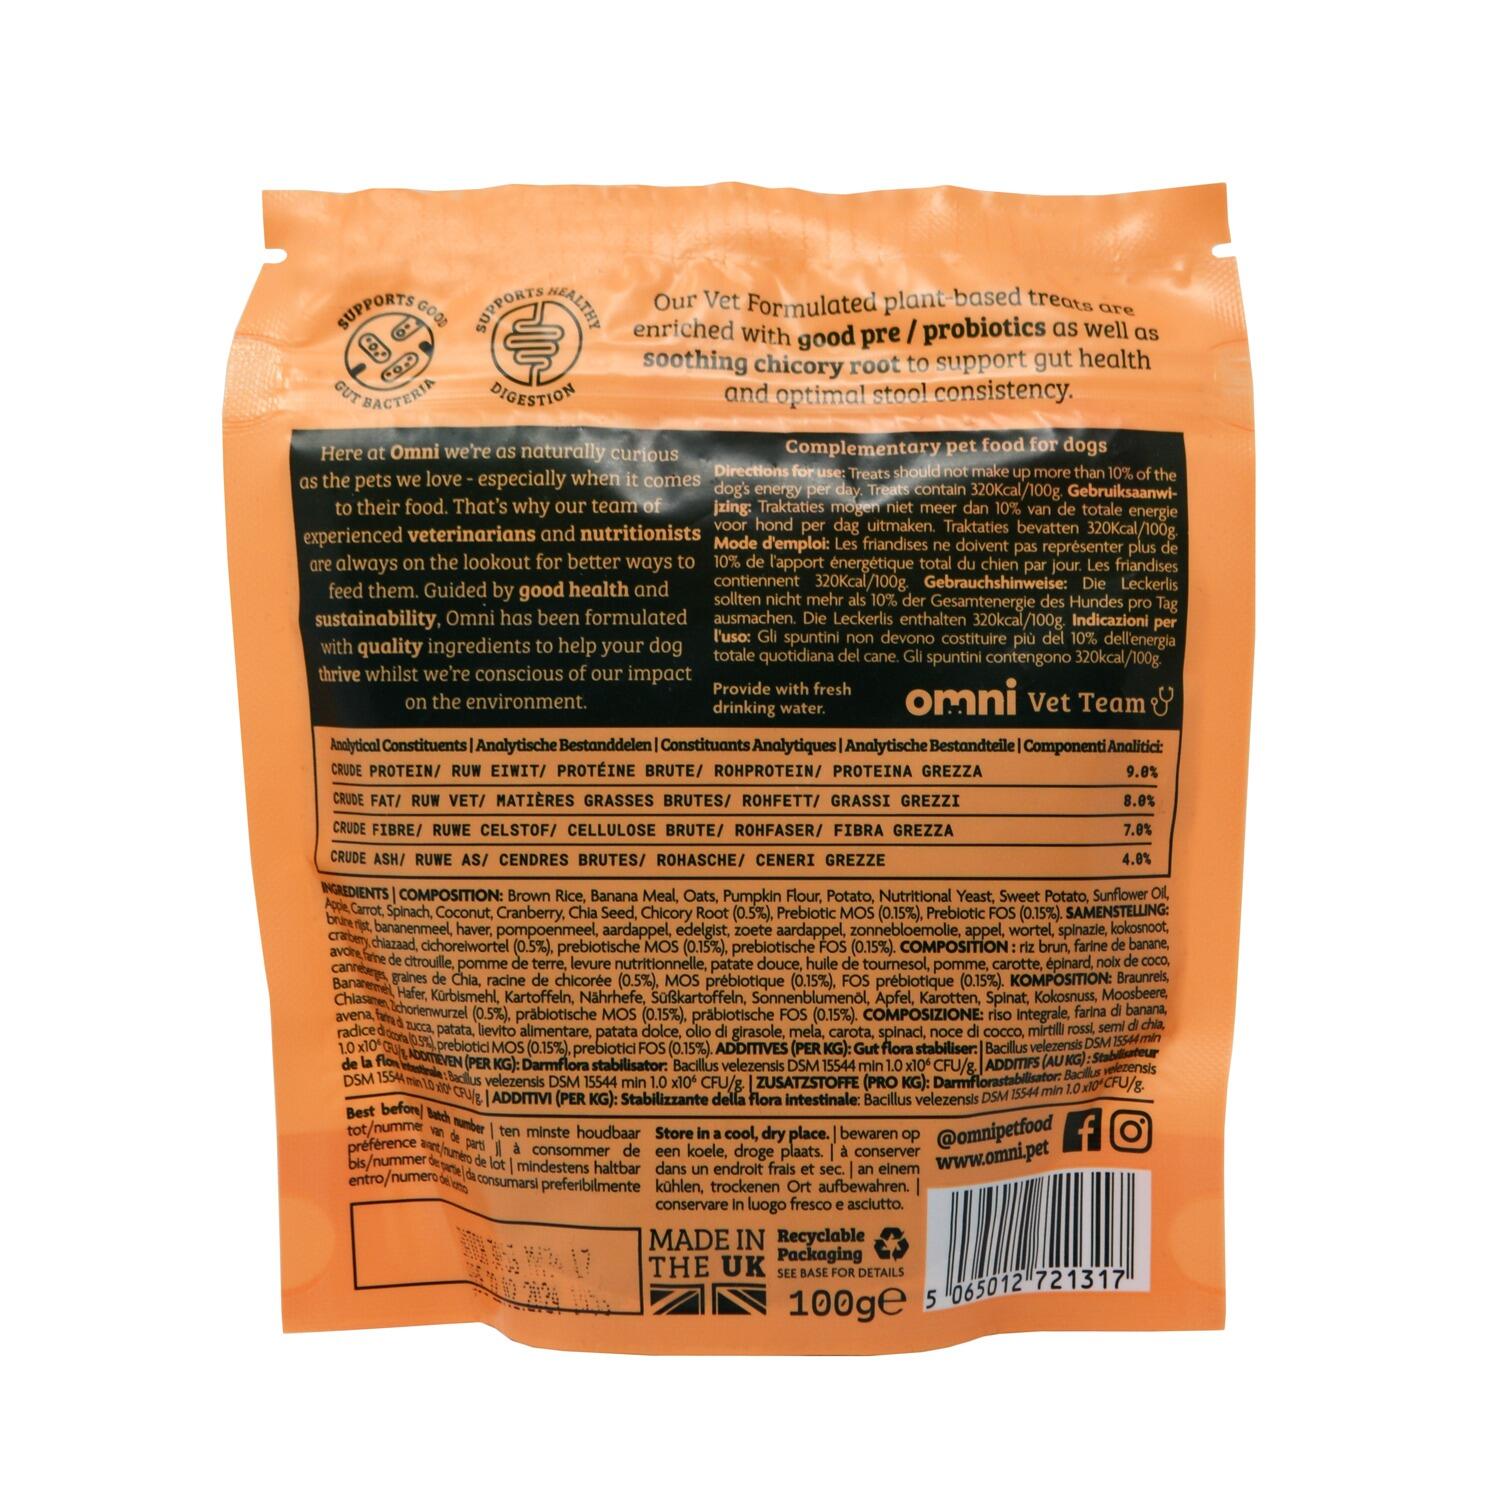 Back of a pack of Digestive Health Plant Based Dog Treats from Omni